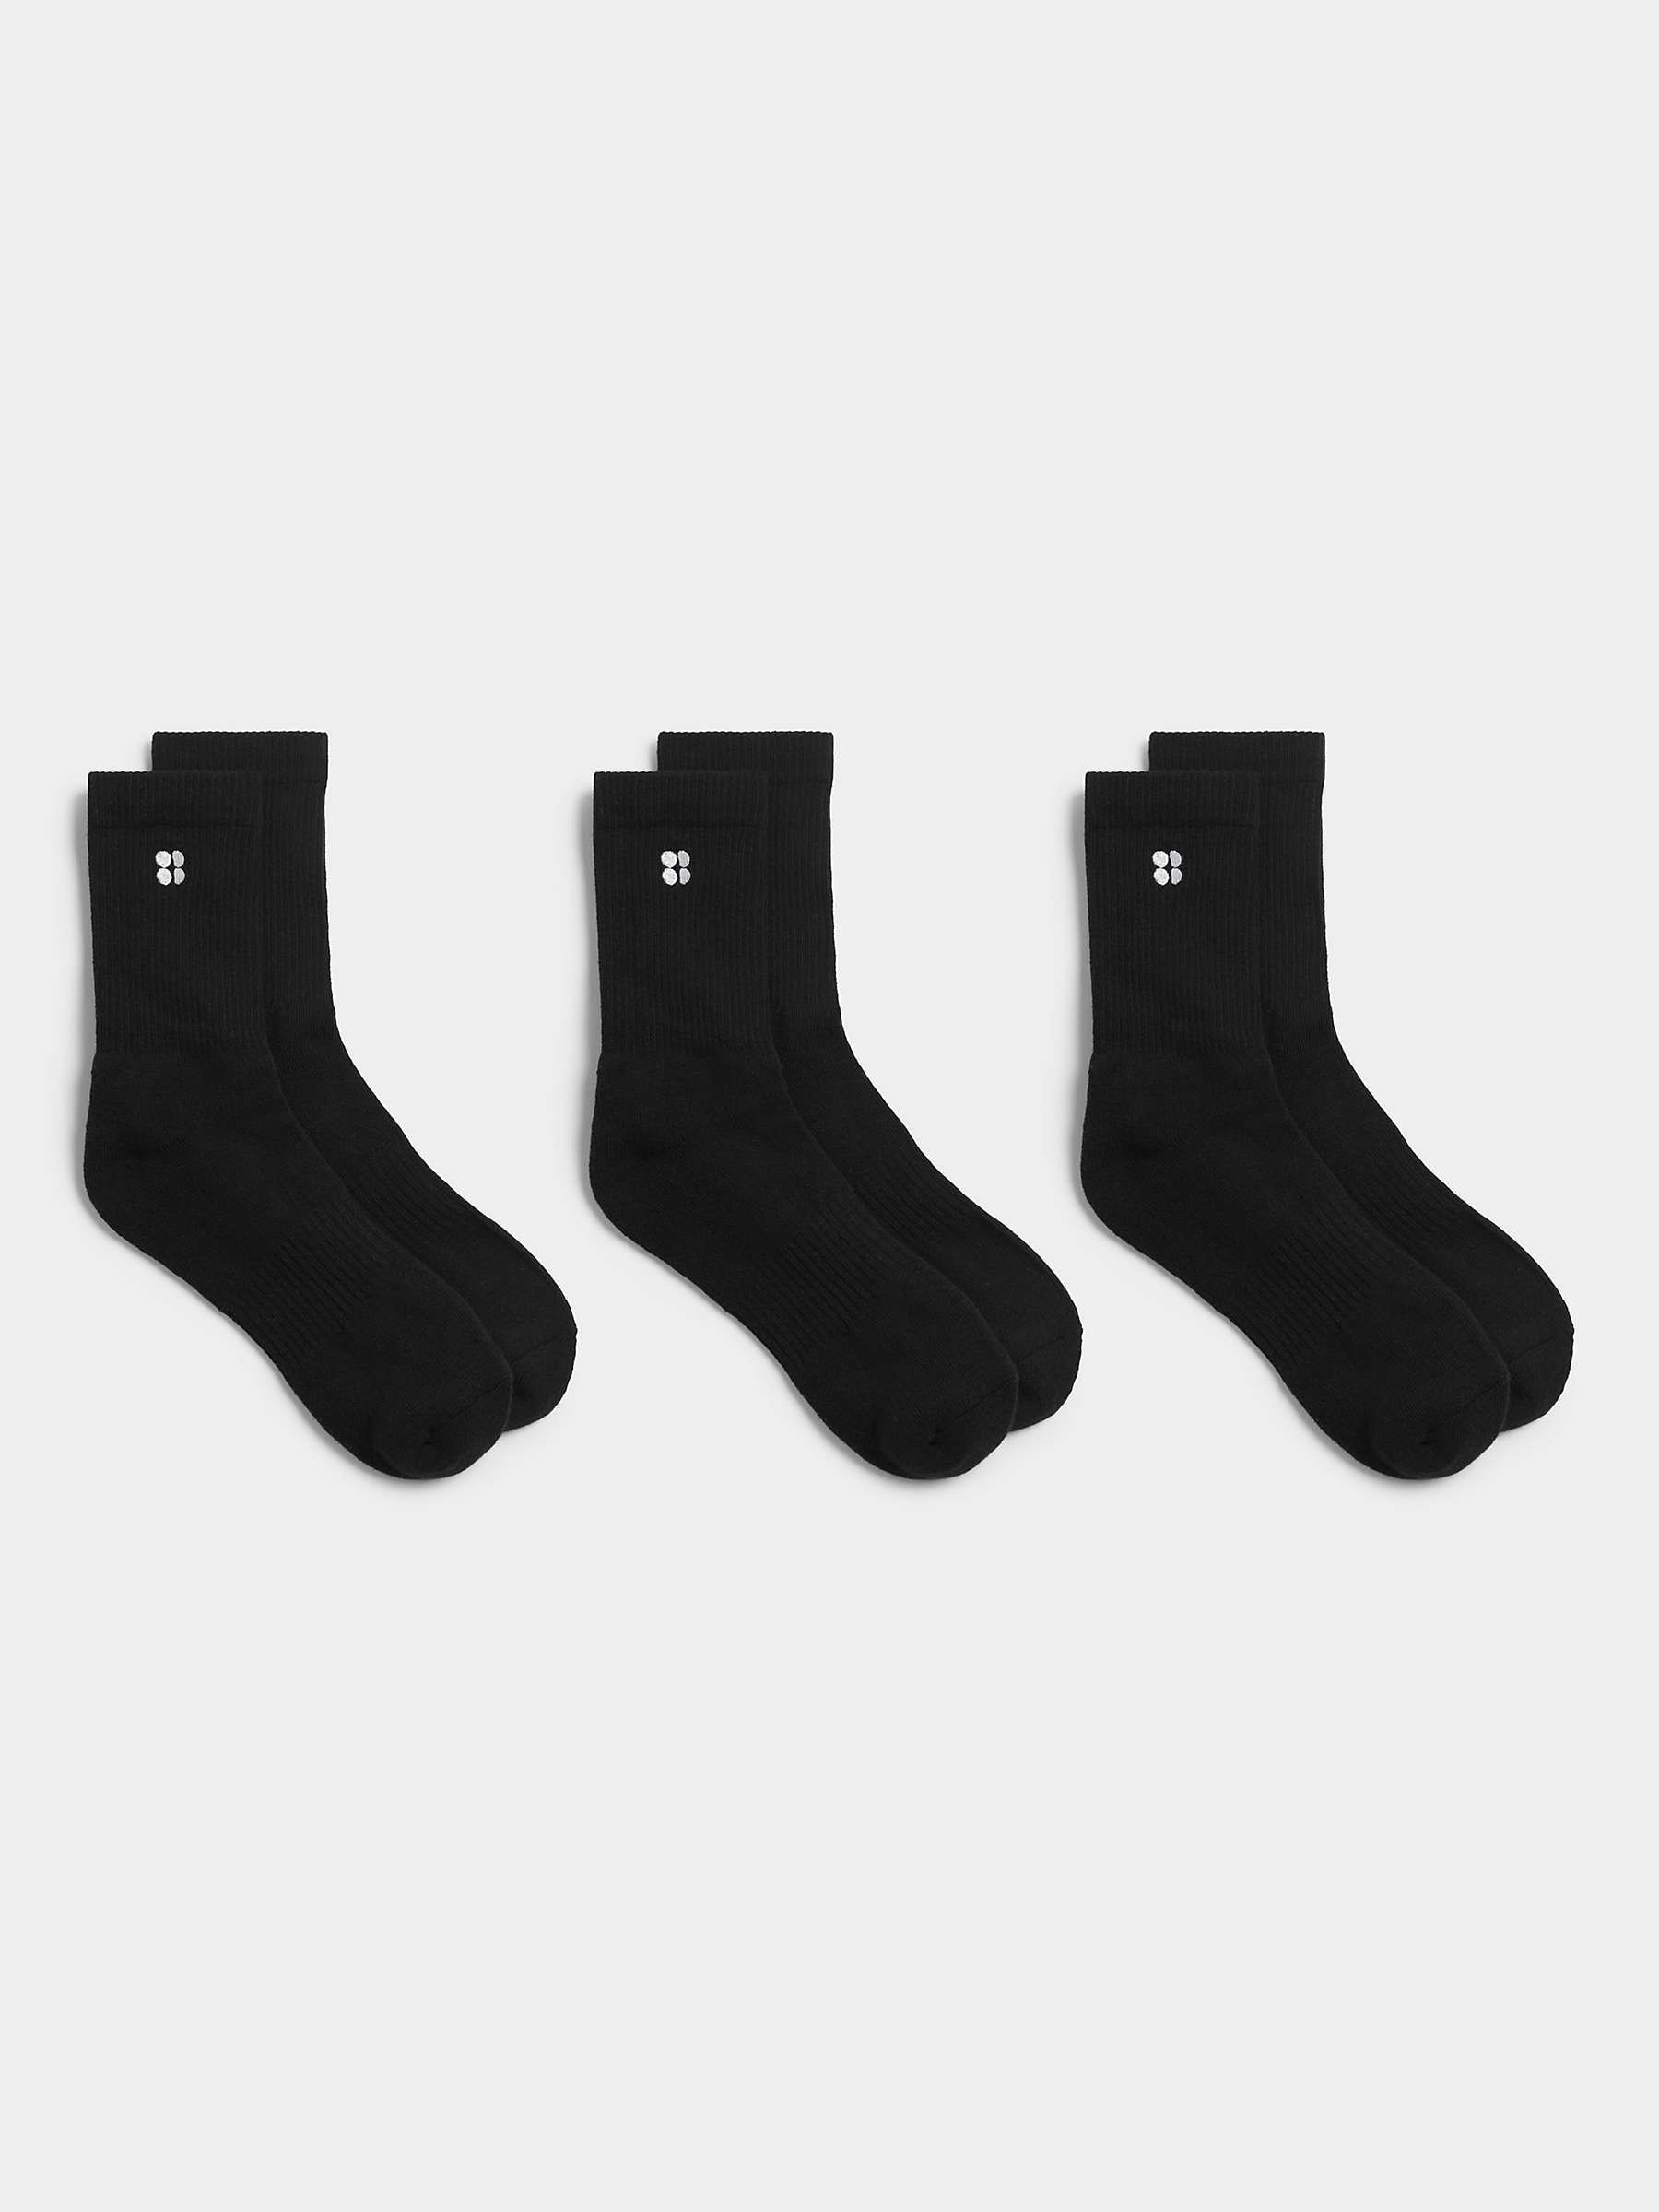 Buy Sweaty Betty Go Faster Ankle Socks, Pack of 3 Online at johnlewis.com